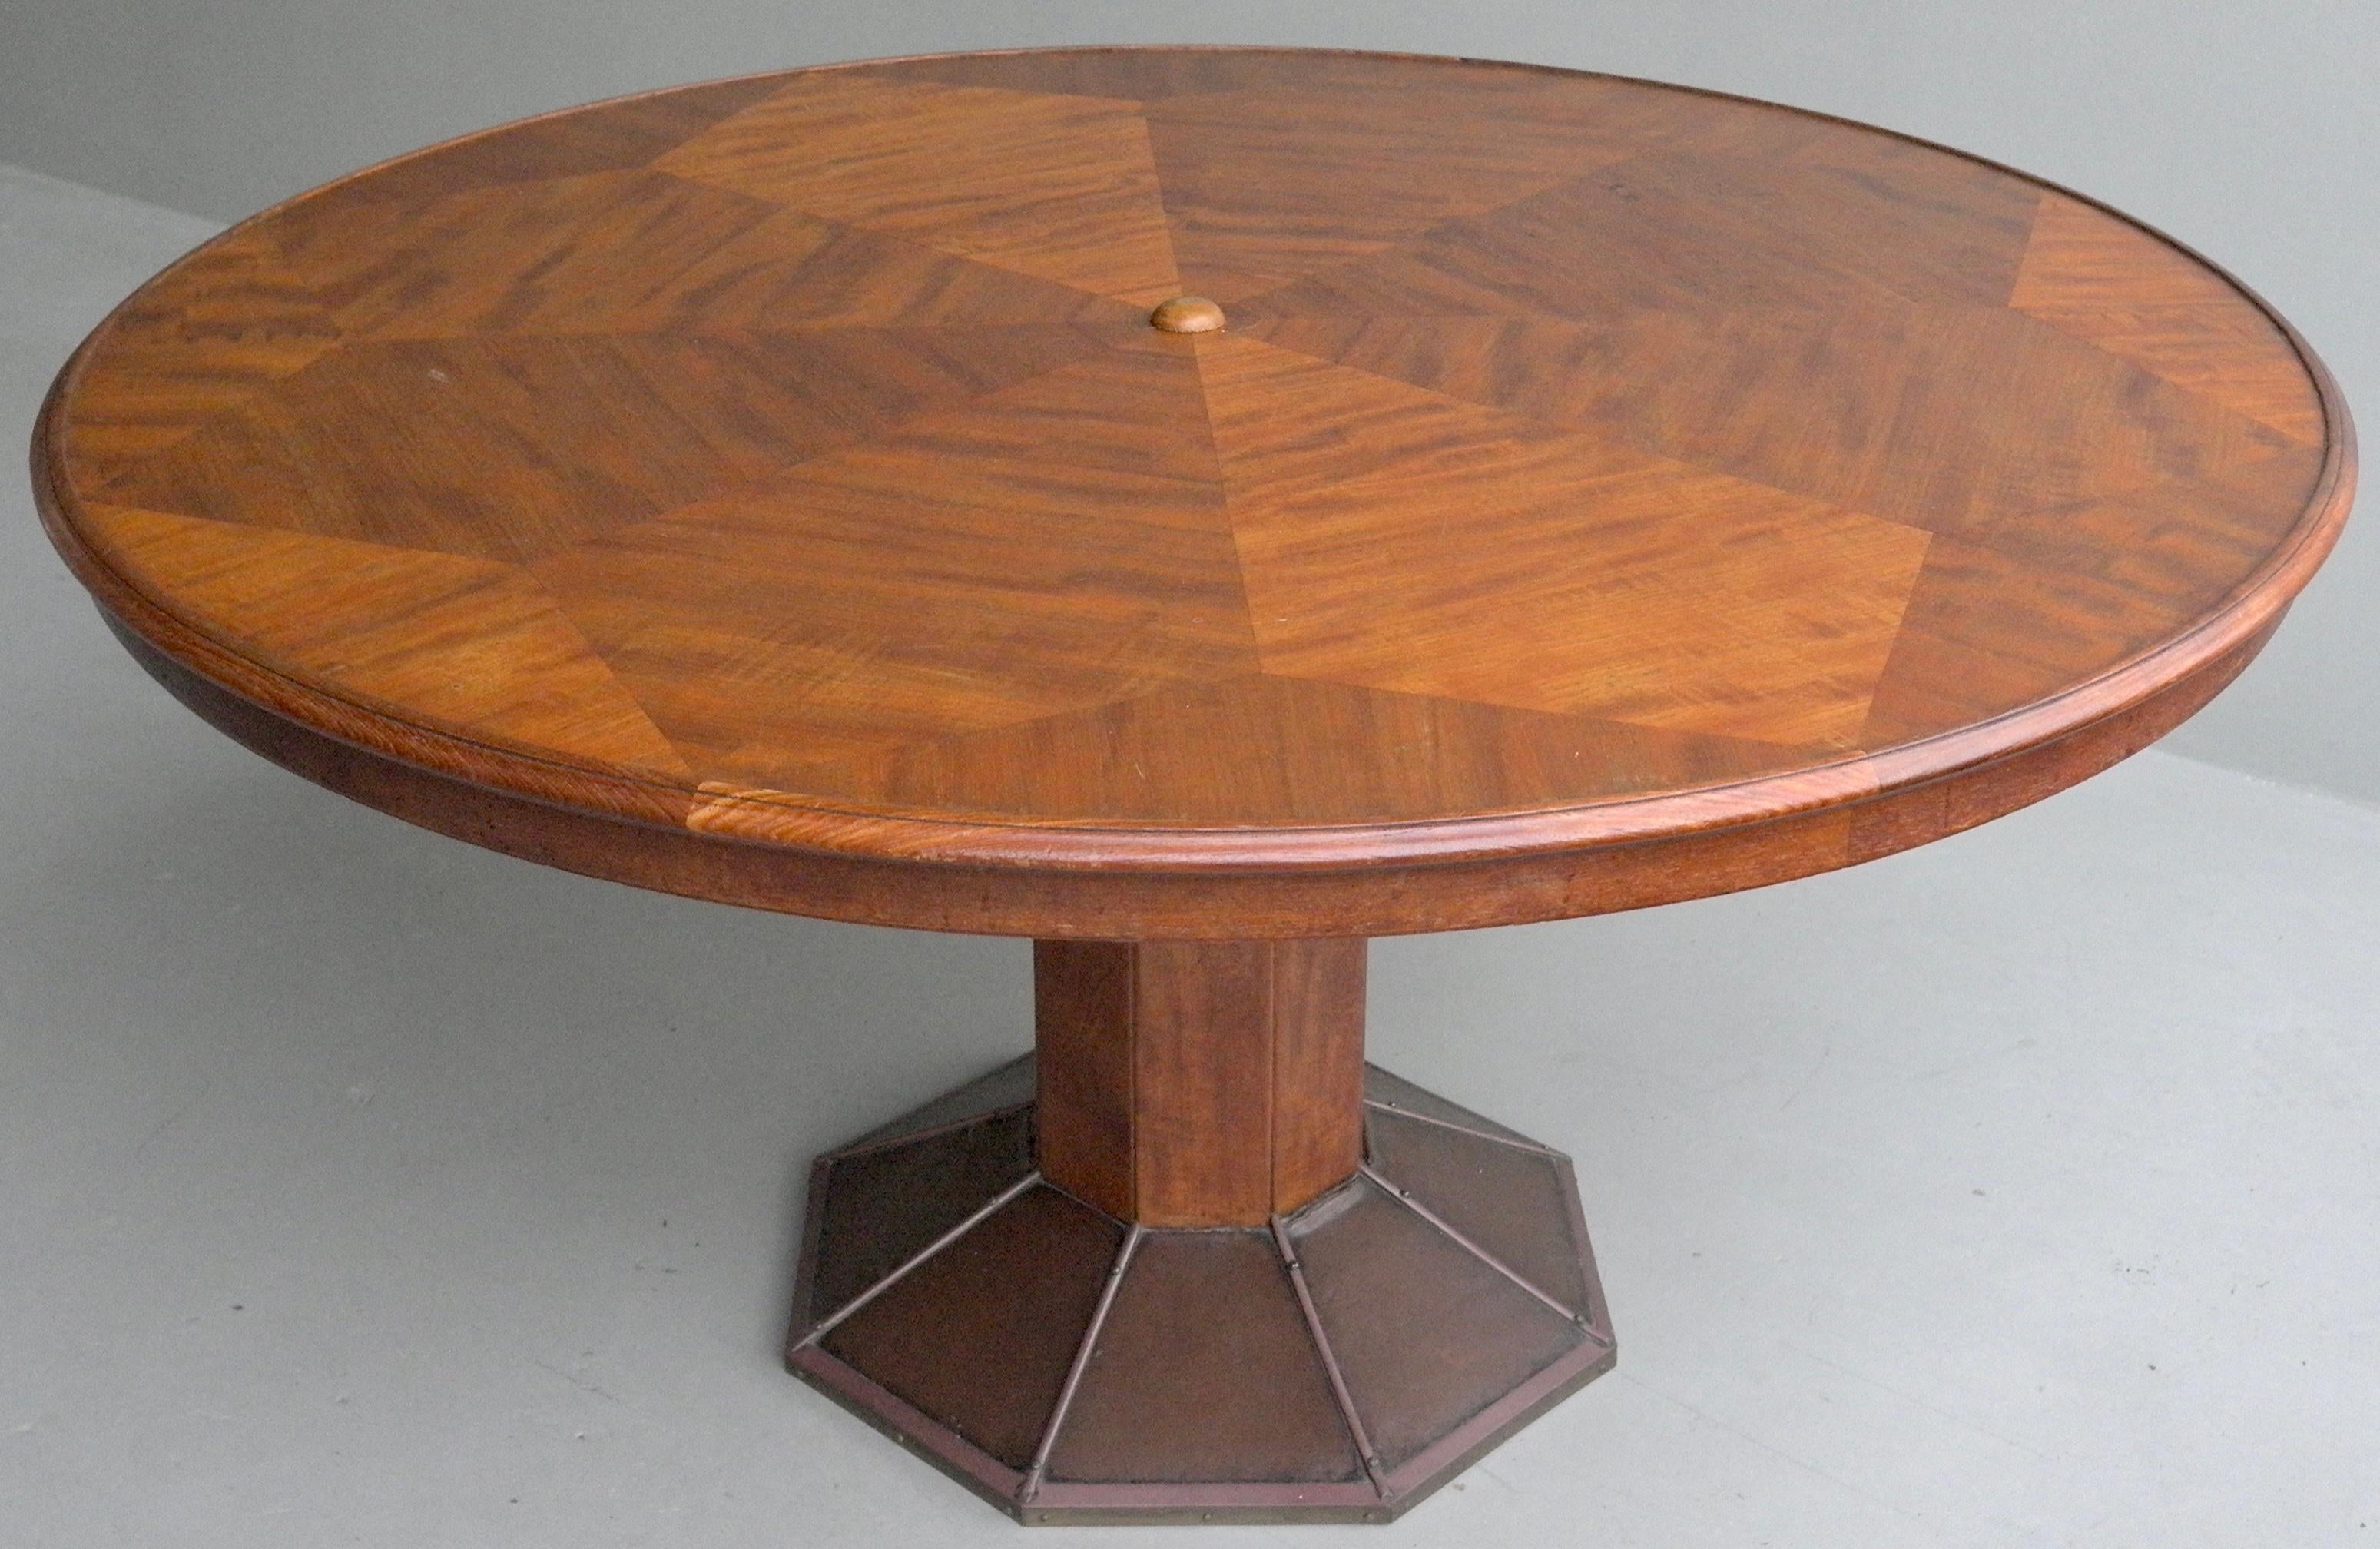 Large round sculptural wooden Art Deco dining table by H.Pander & Zonen. Well made timbered piece, the base has fine copper elements.

Please contact us for worldwide shipping options.